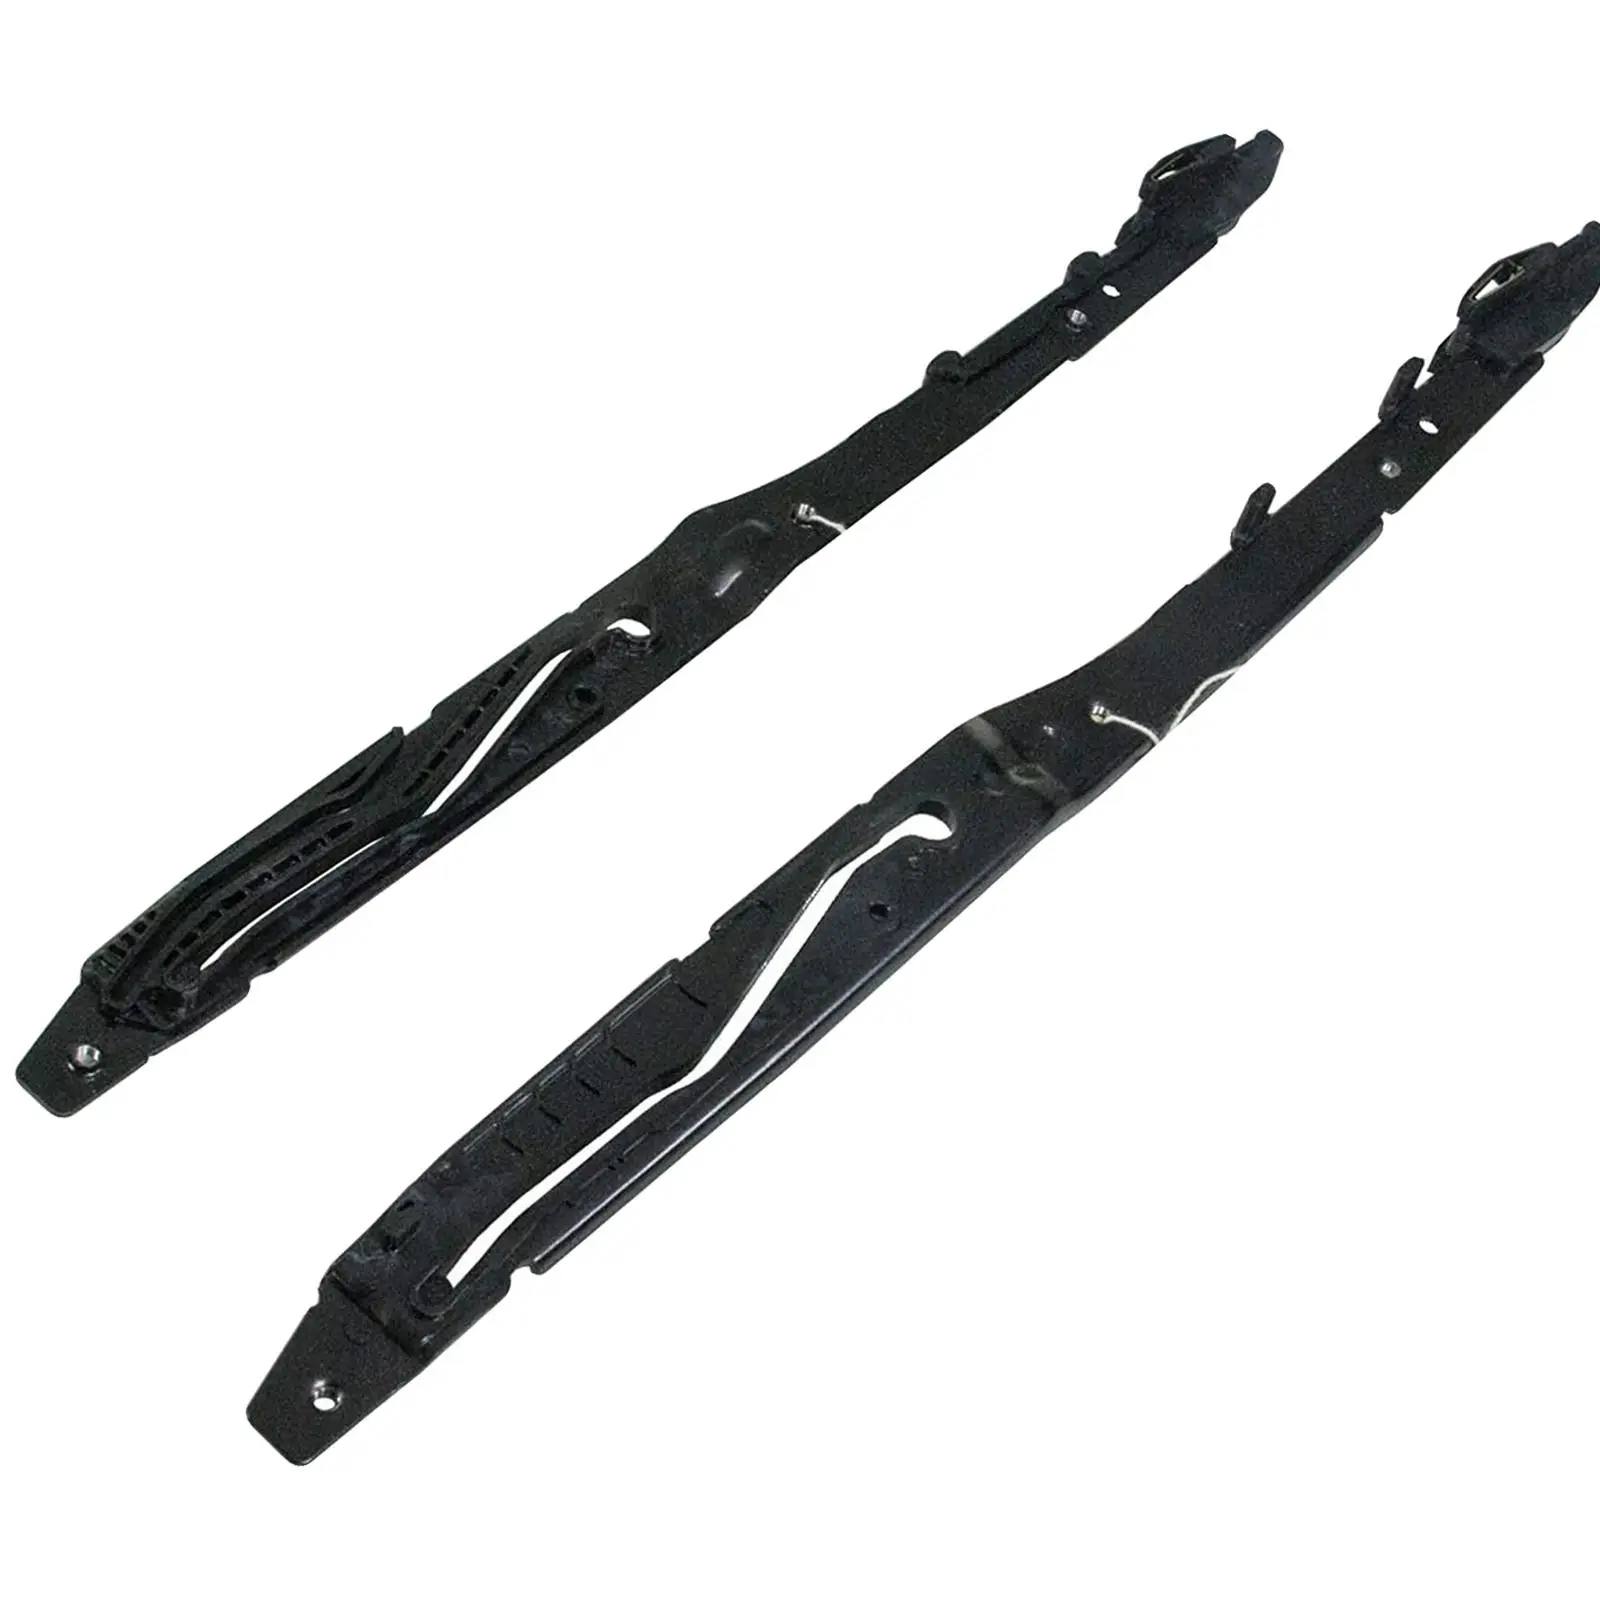 2Pcs Sunroof Track Assembly Repair Kit FL3Z-1651071-A Replaces for Ford F250 F350 F450 2017-2019, High Reliability